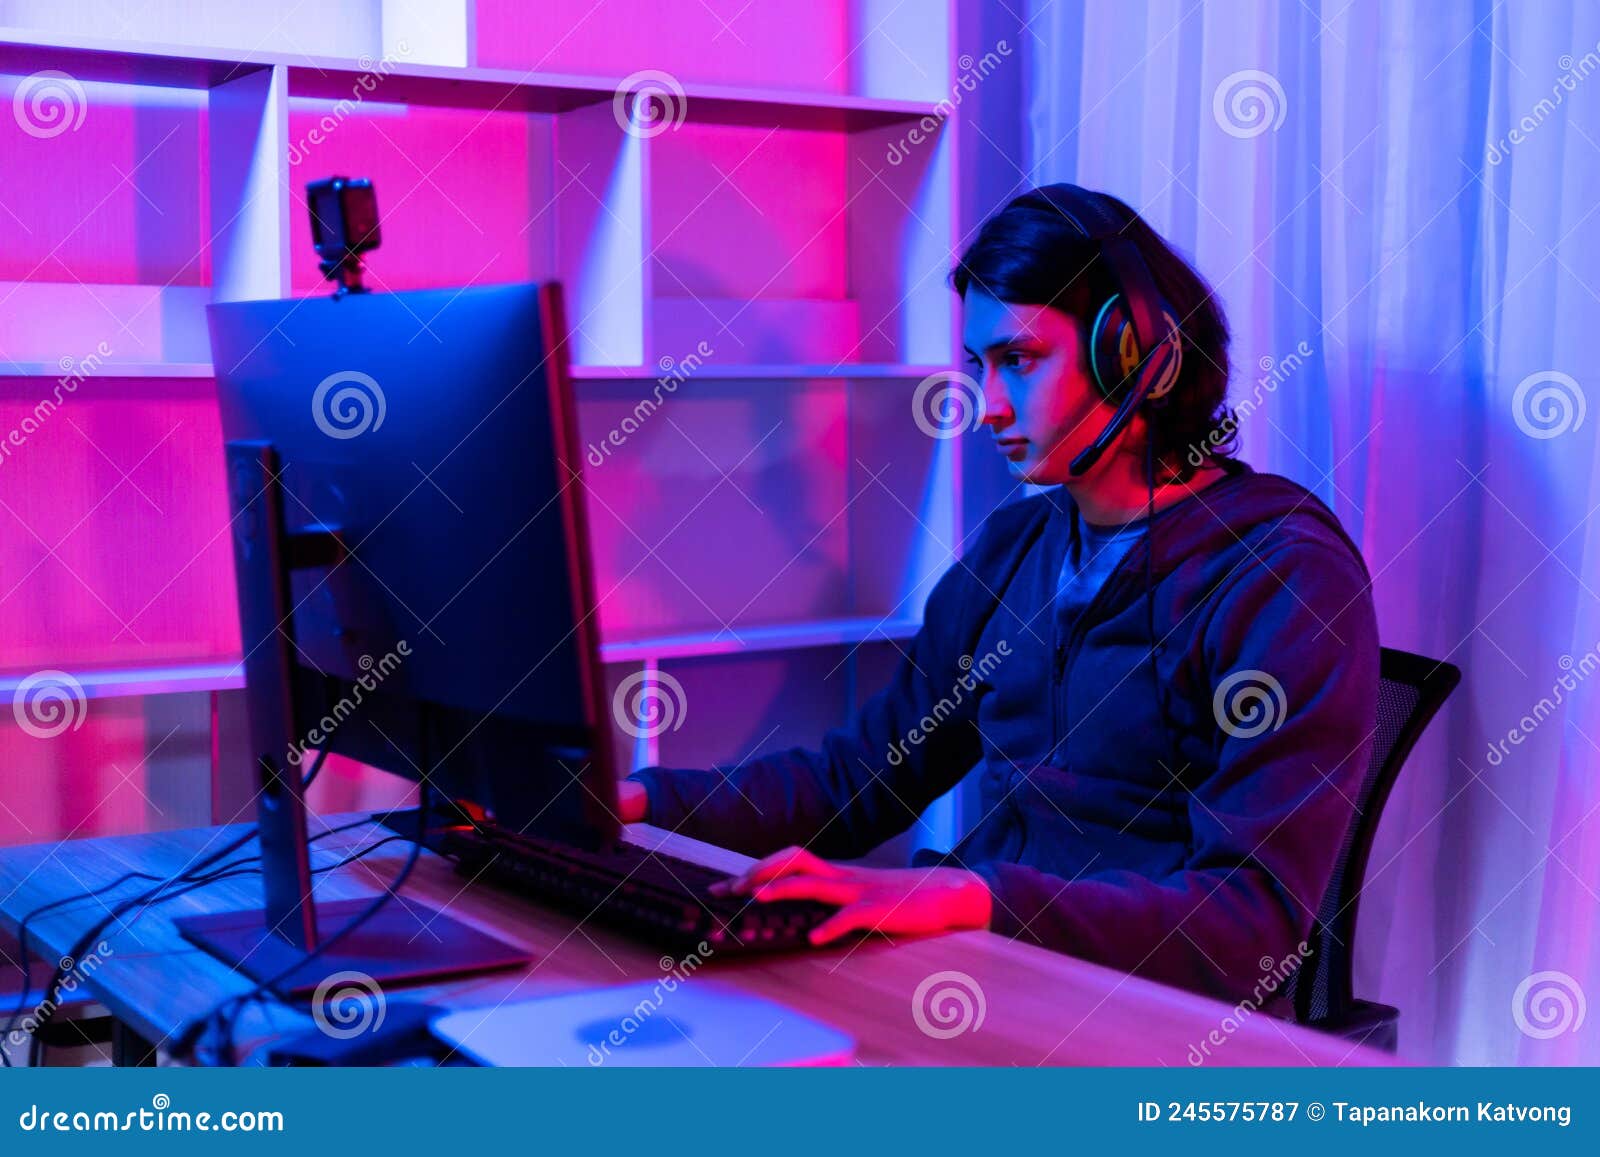 Young Men Play E-Sport Games or Streamers, Male Enjoying Playing Online Games Stock Image